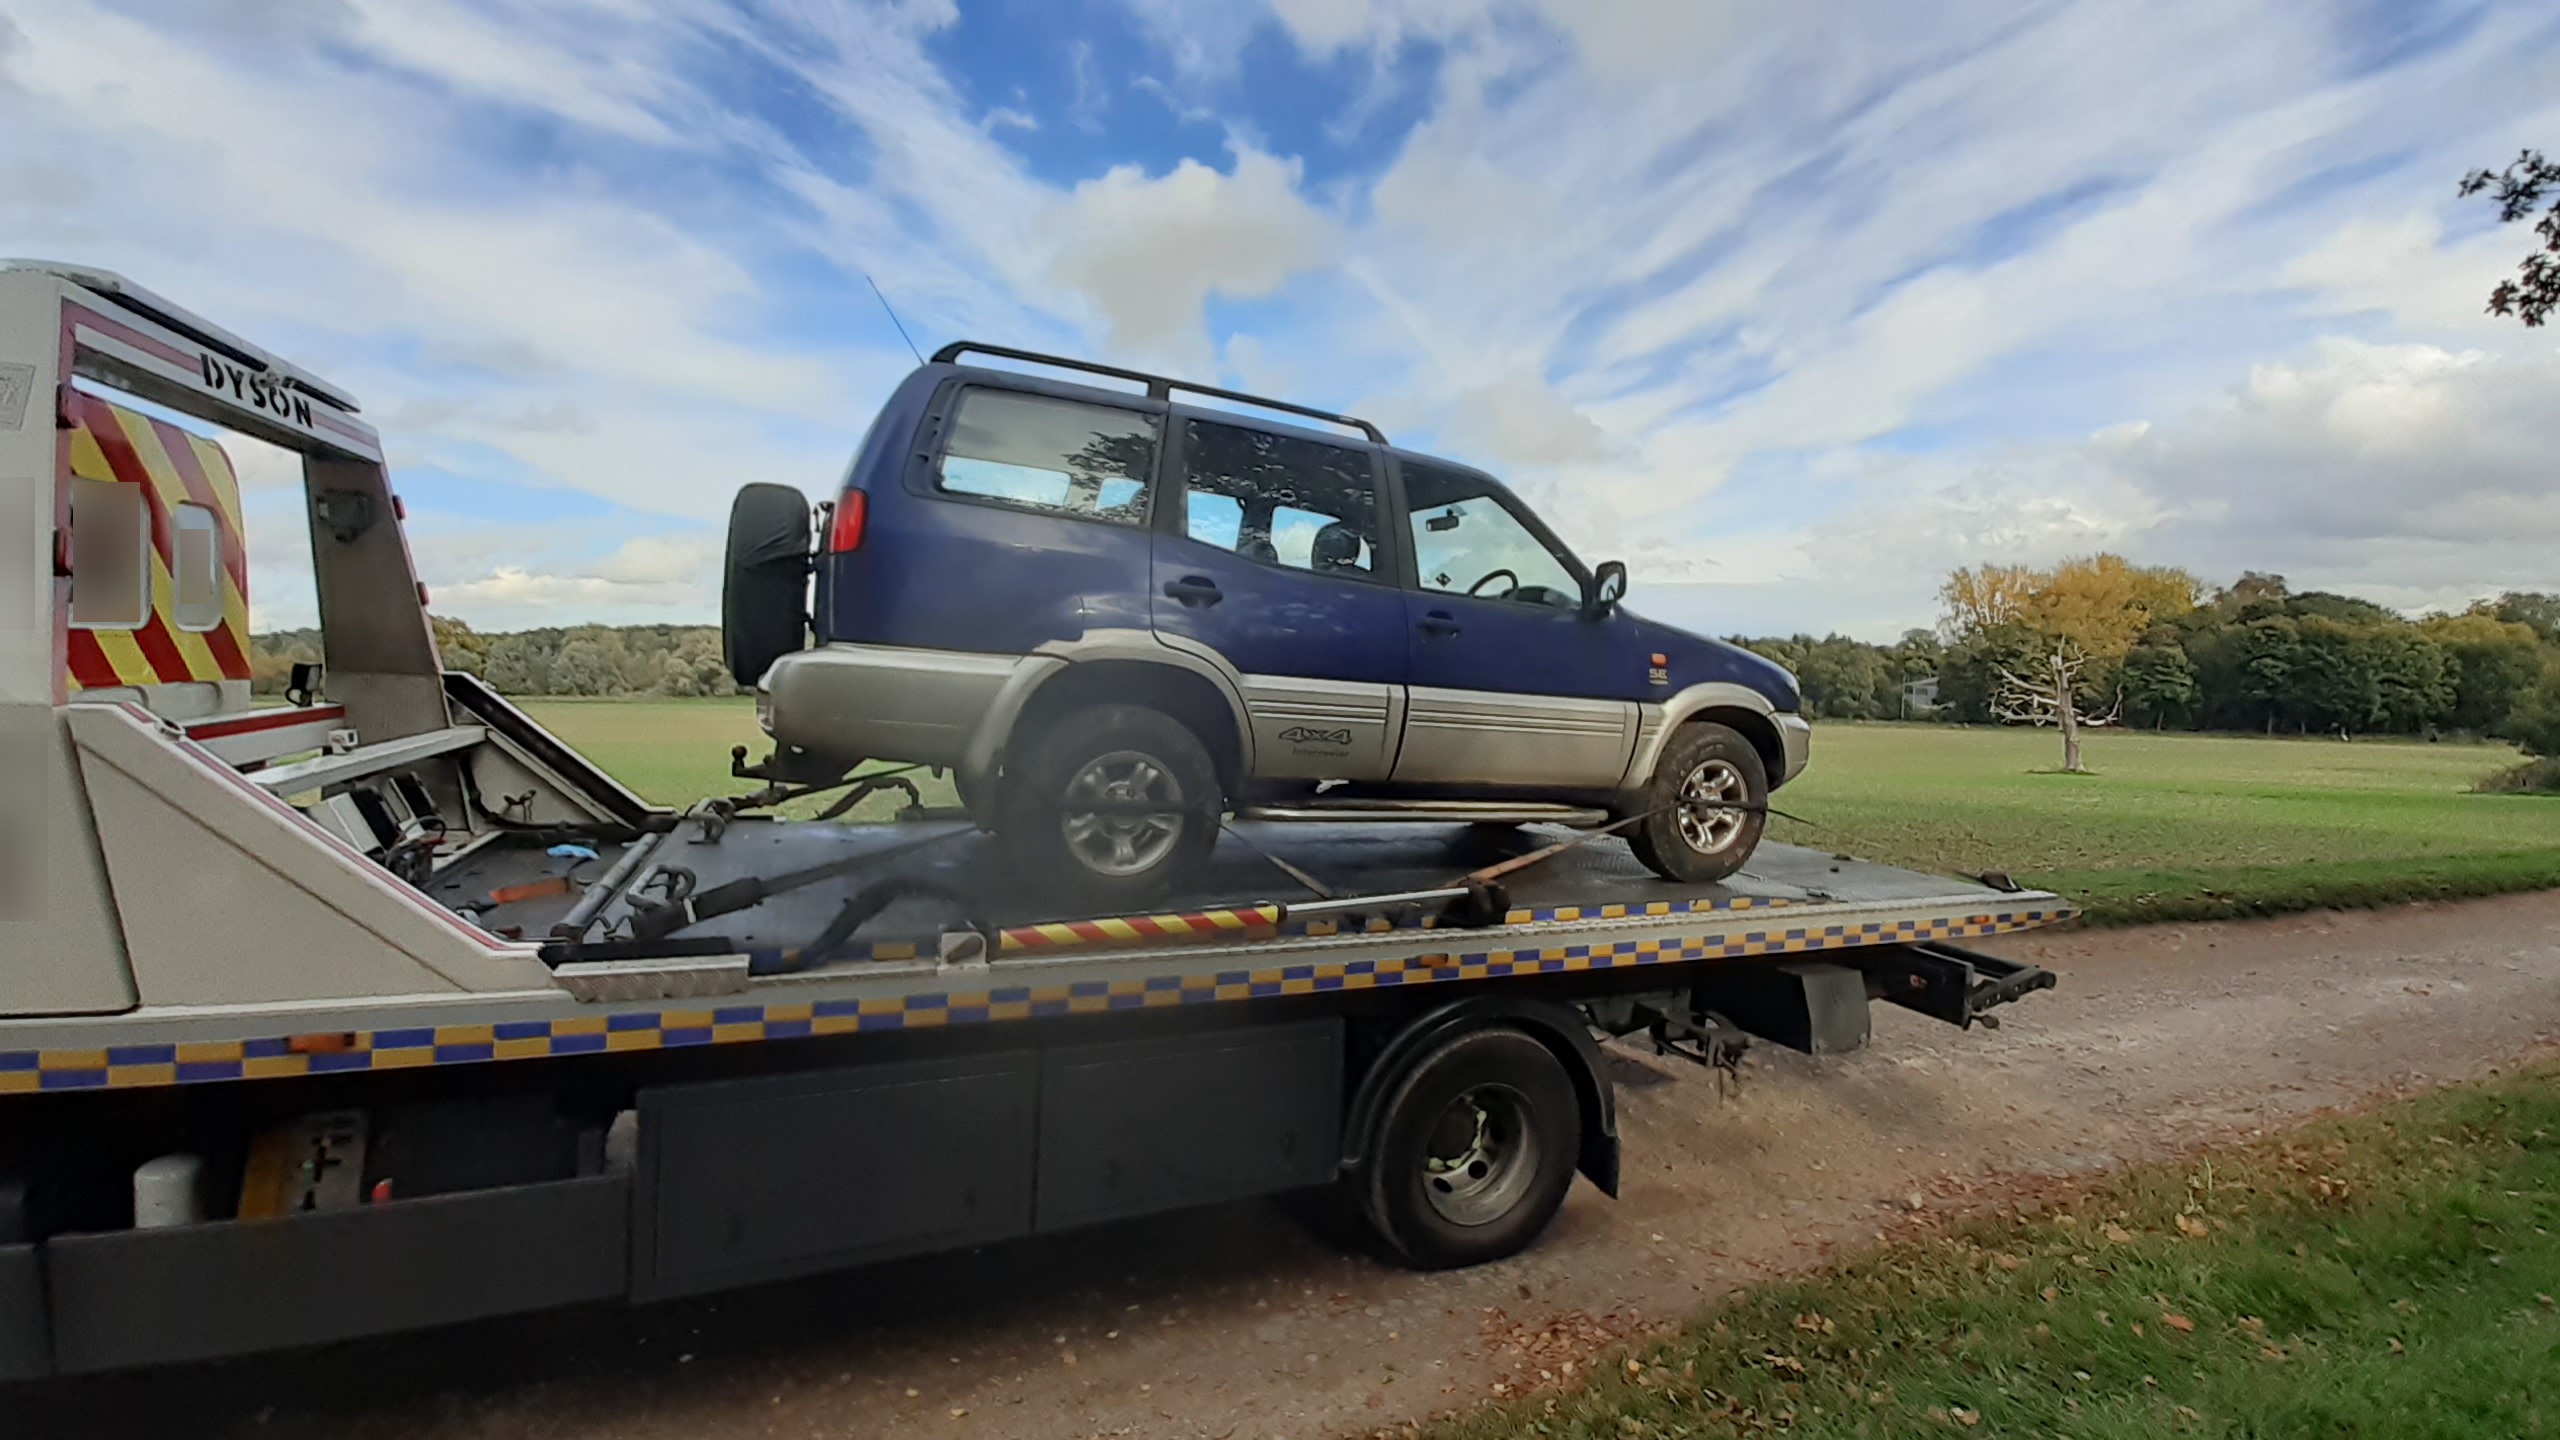 Police seized the vehicle the pair used to travel to the Saffron Walden area. (Essex Police/ PA)